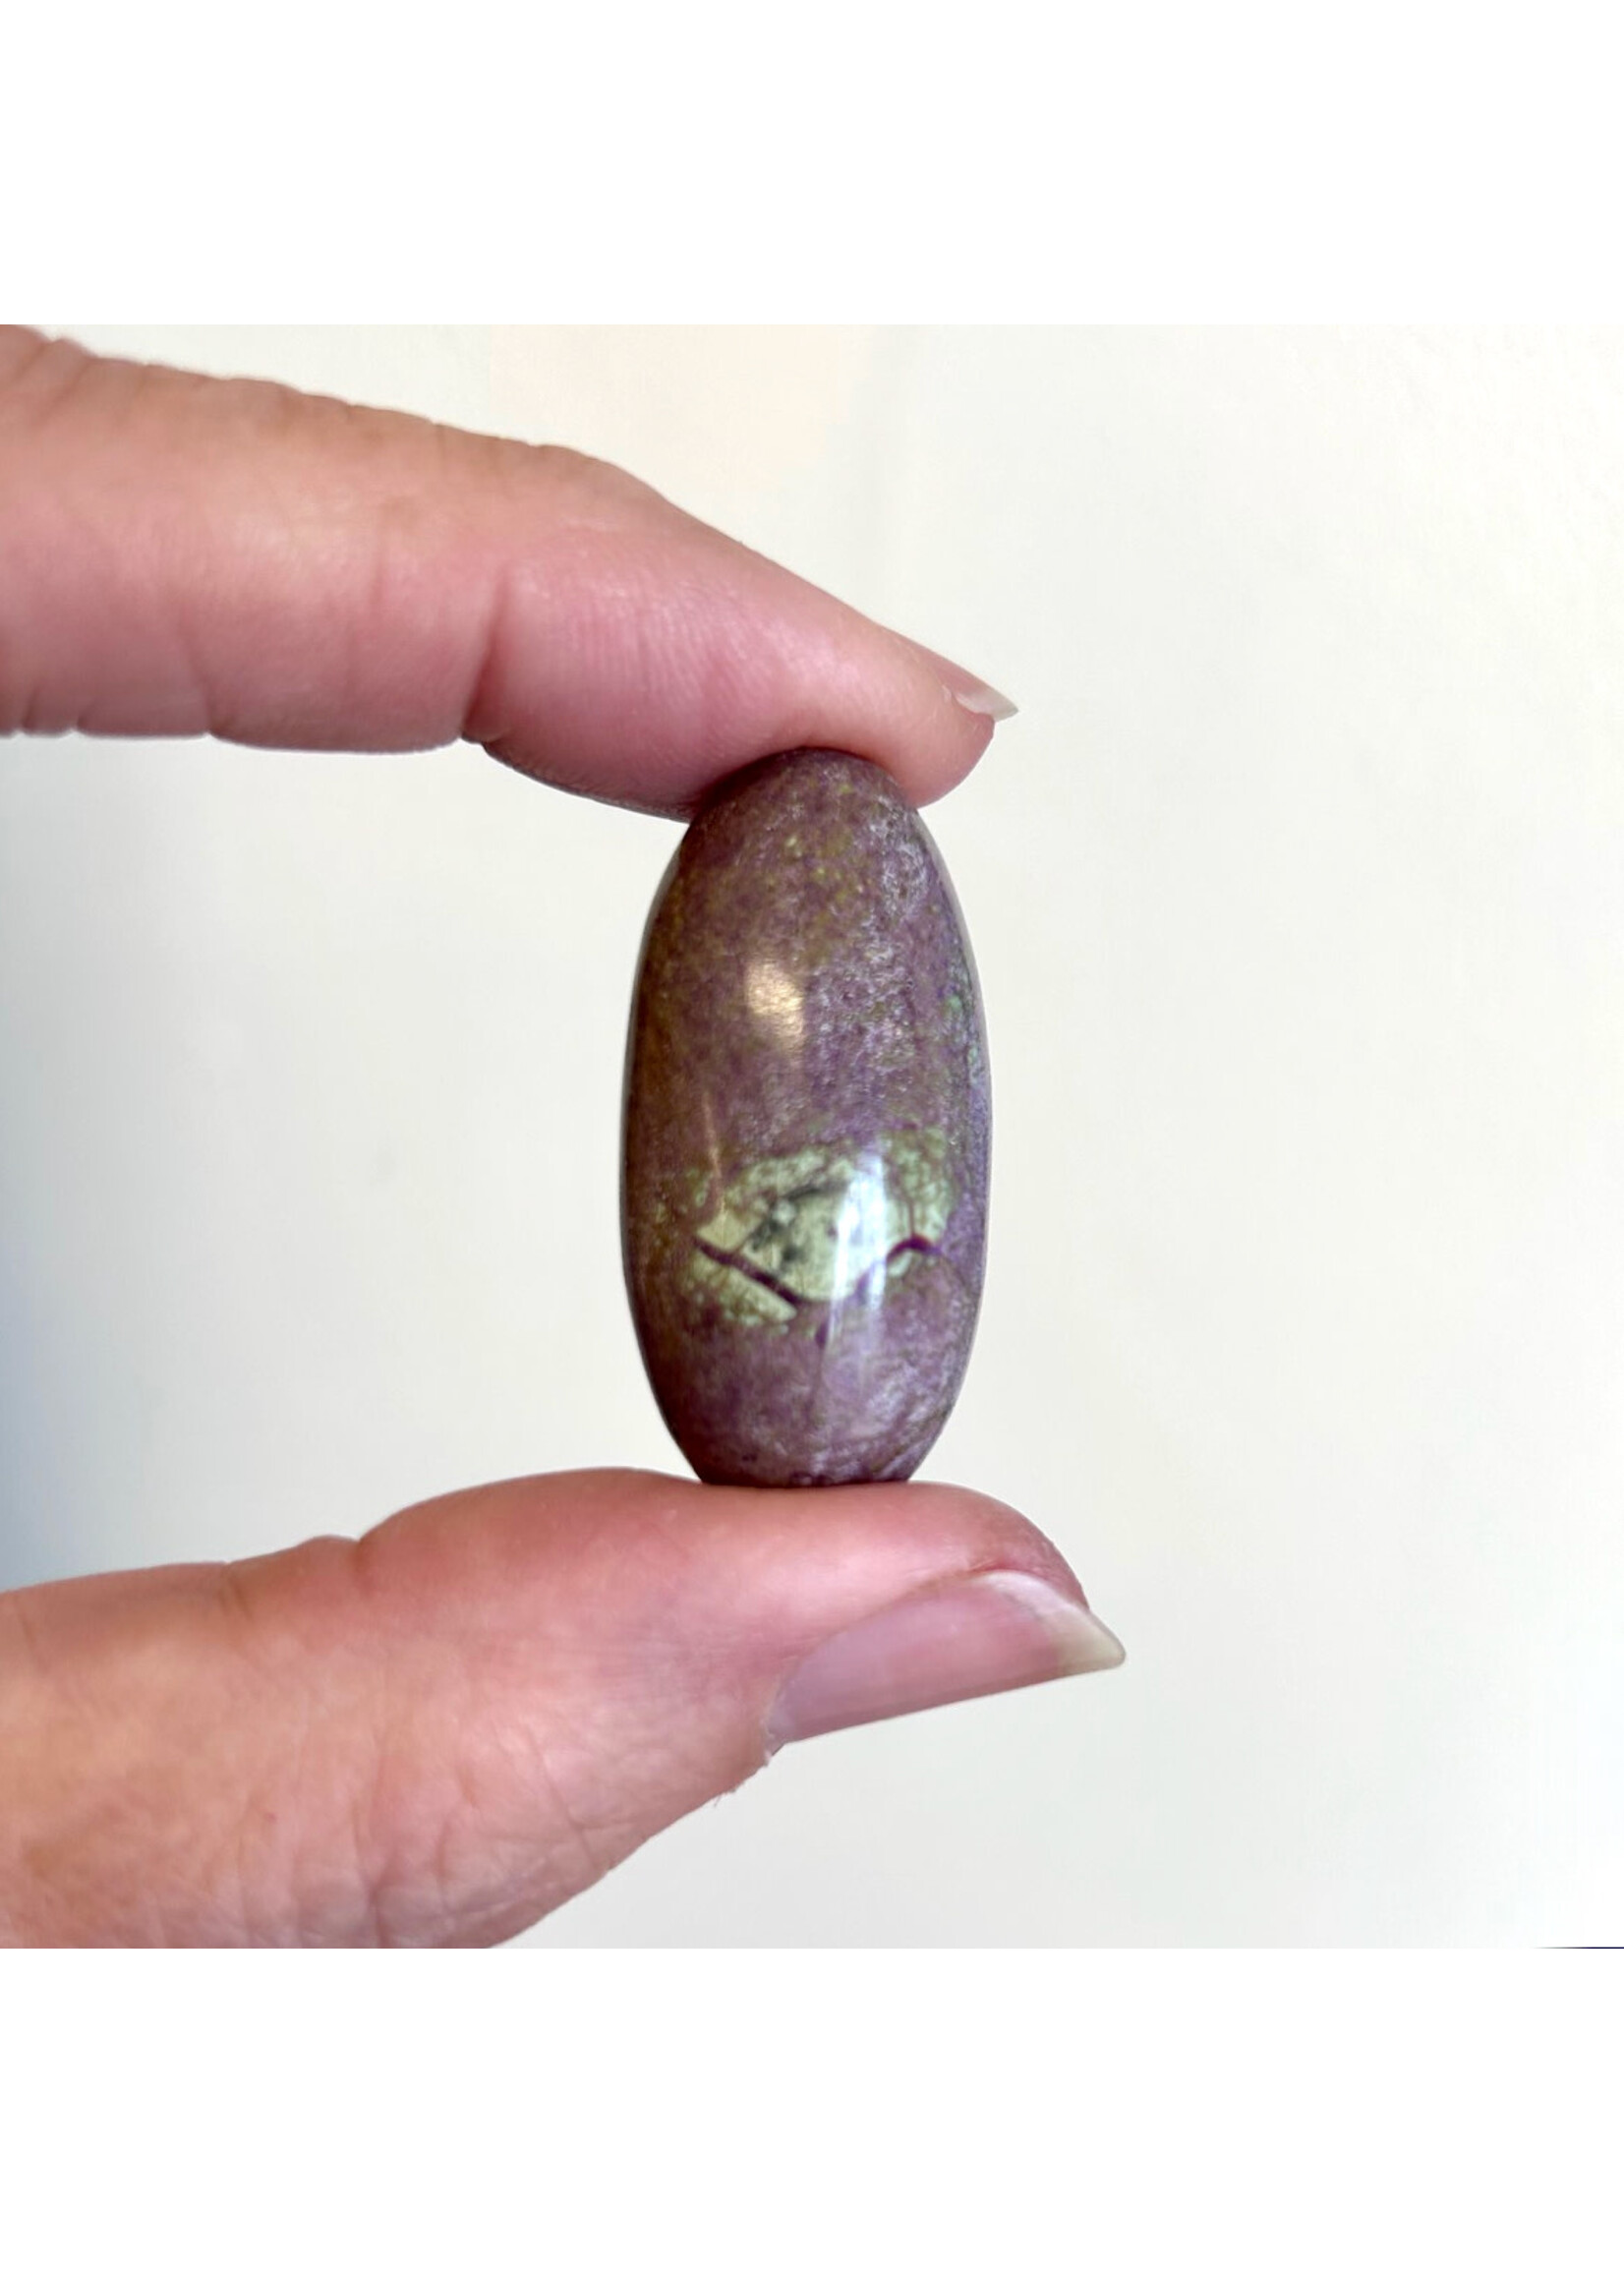 Atlantisite Shiva Lingam for reconnecting to ancient wisdom